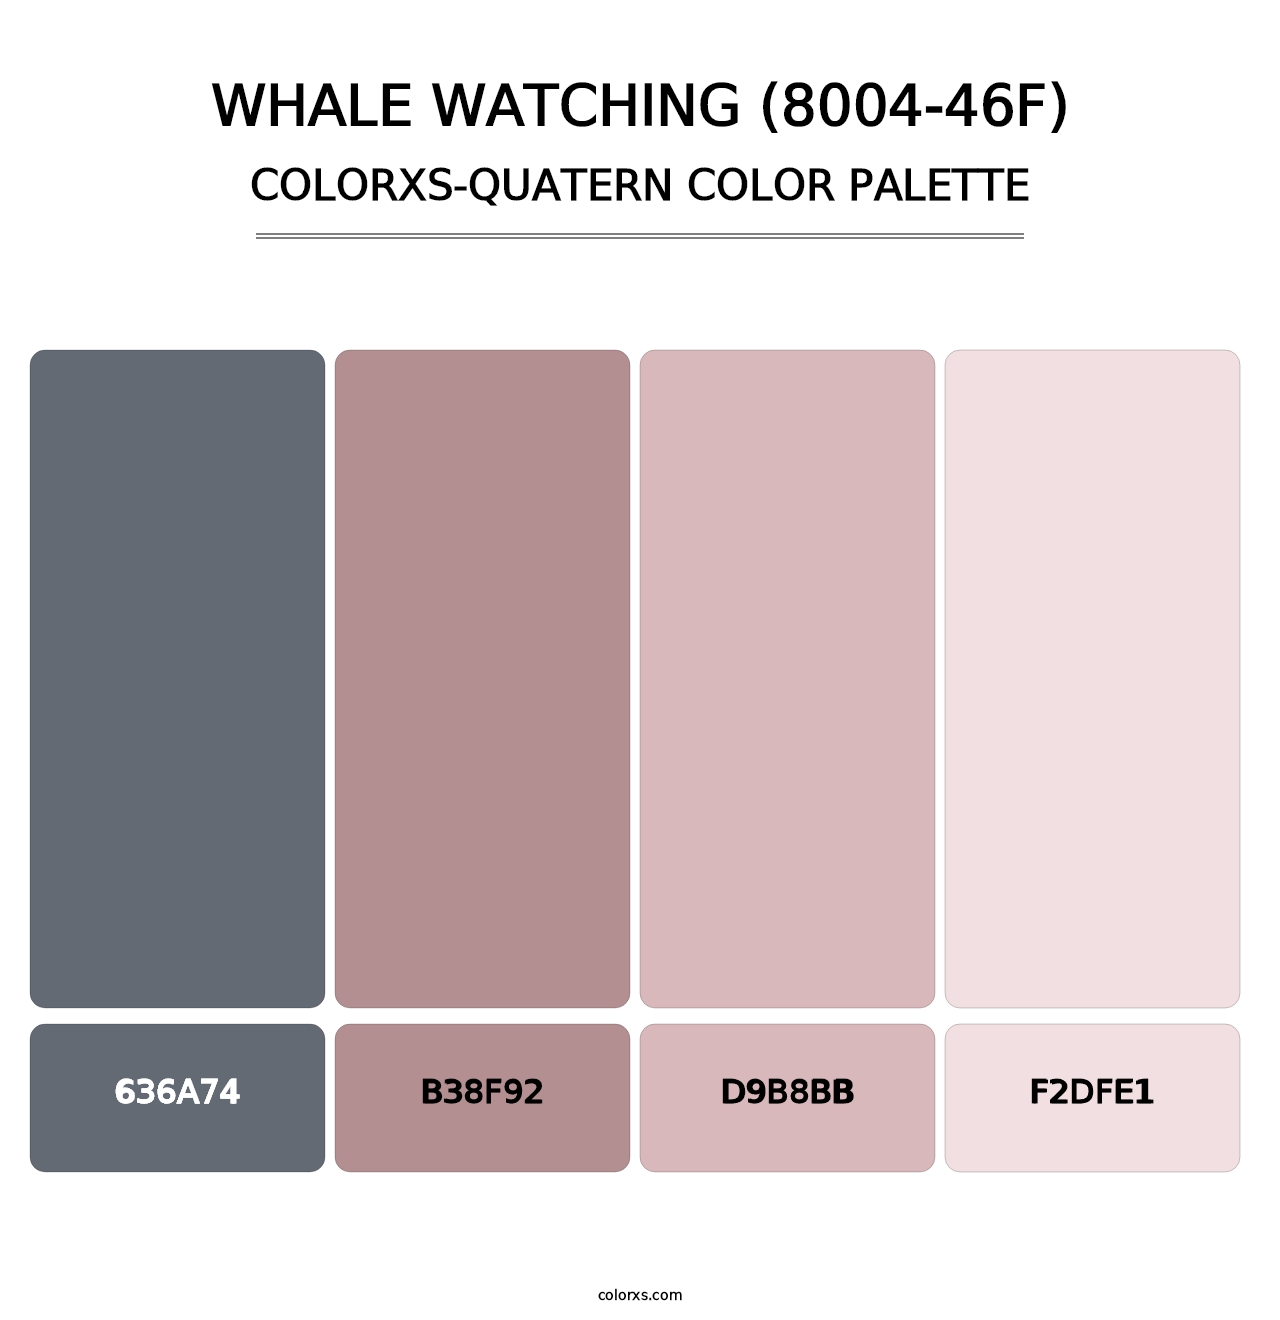 Whale Watching (8004-46F) - Colorxs Quatern Palette